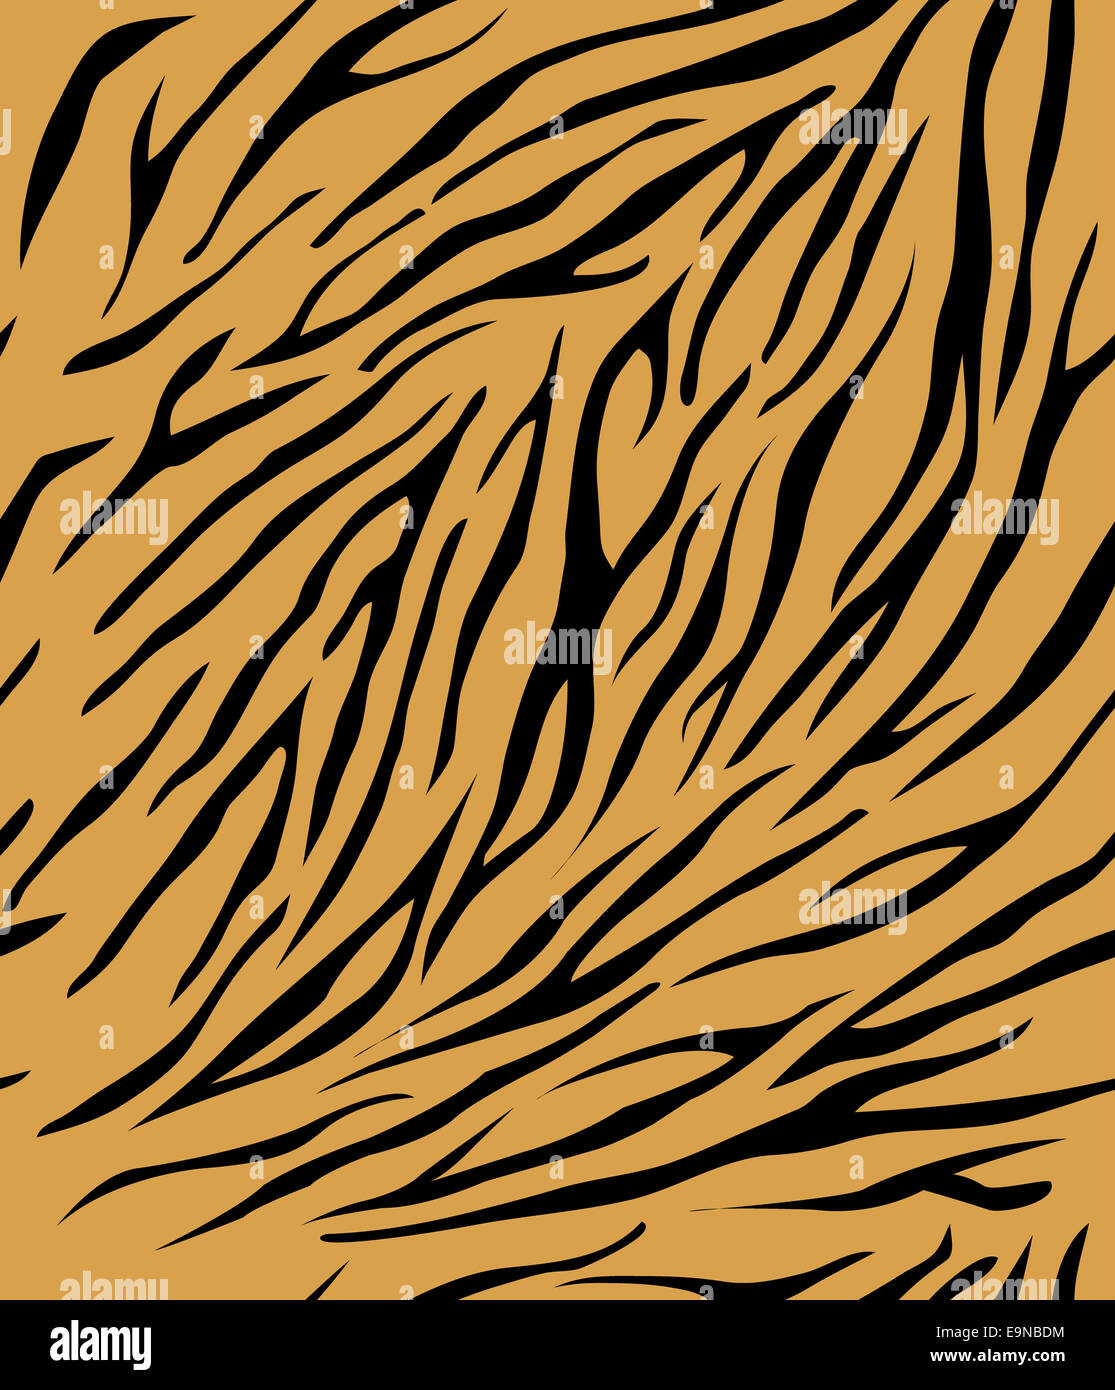 Seamless pattern for backgrounds. Animal print. Stock Photo